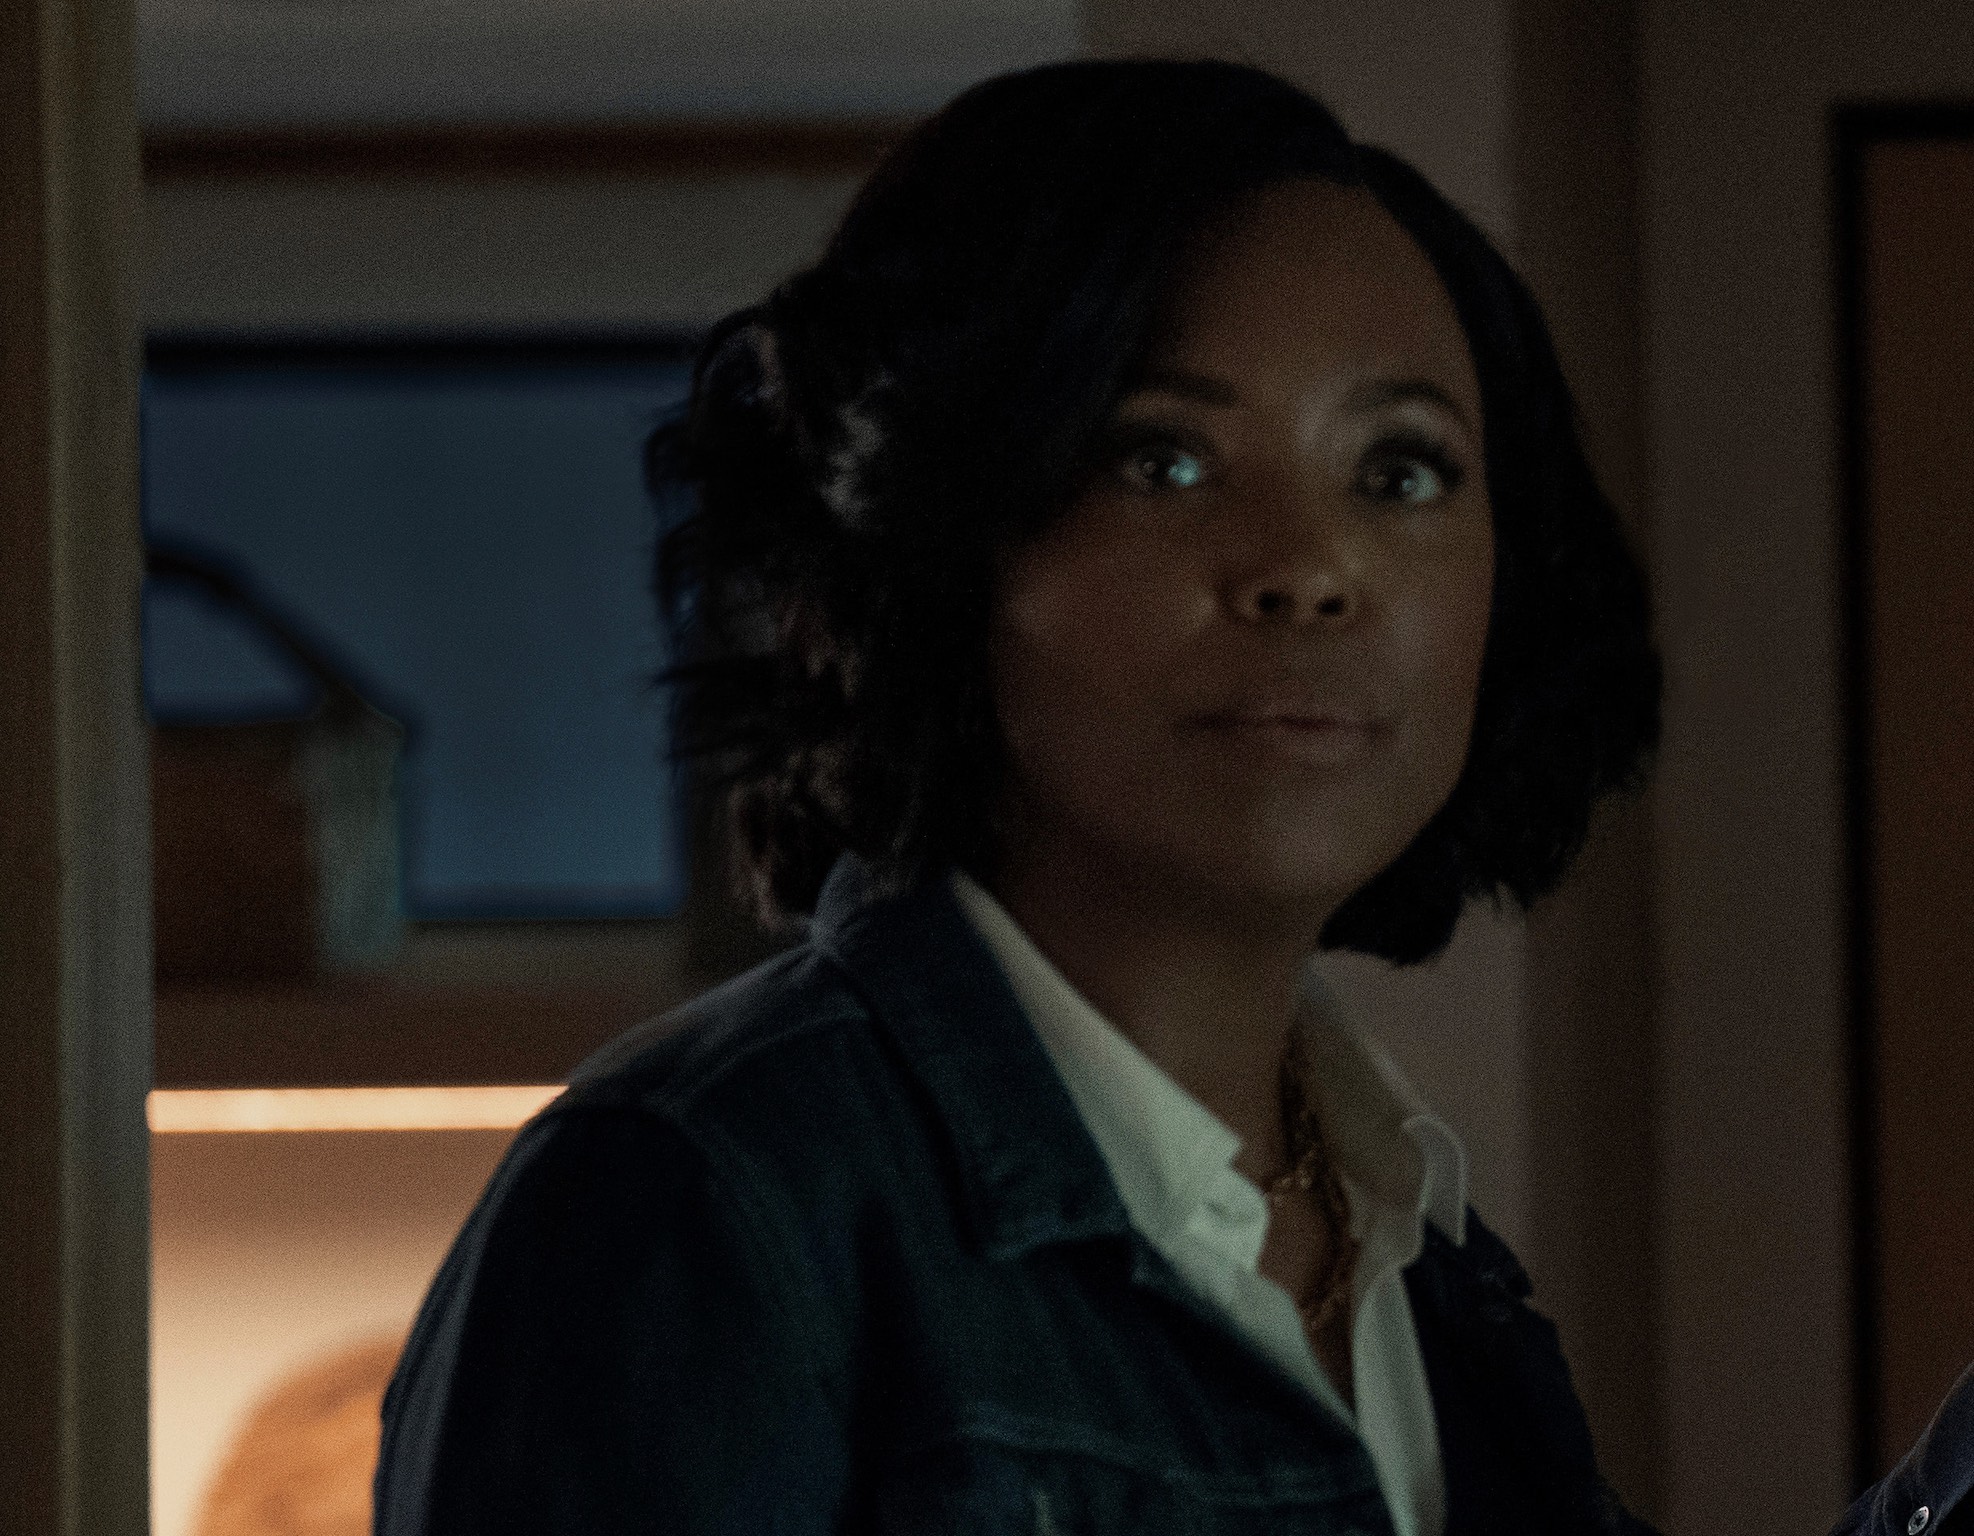 The Last Thing He Told Me Cast on Apple TV+ - Aisha Tyler as Jules